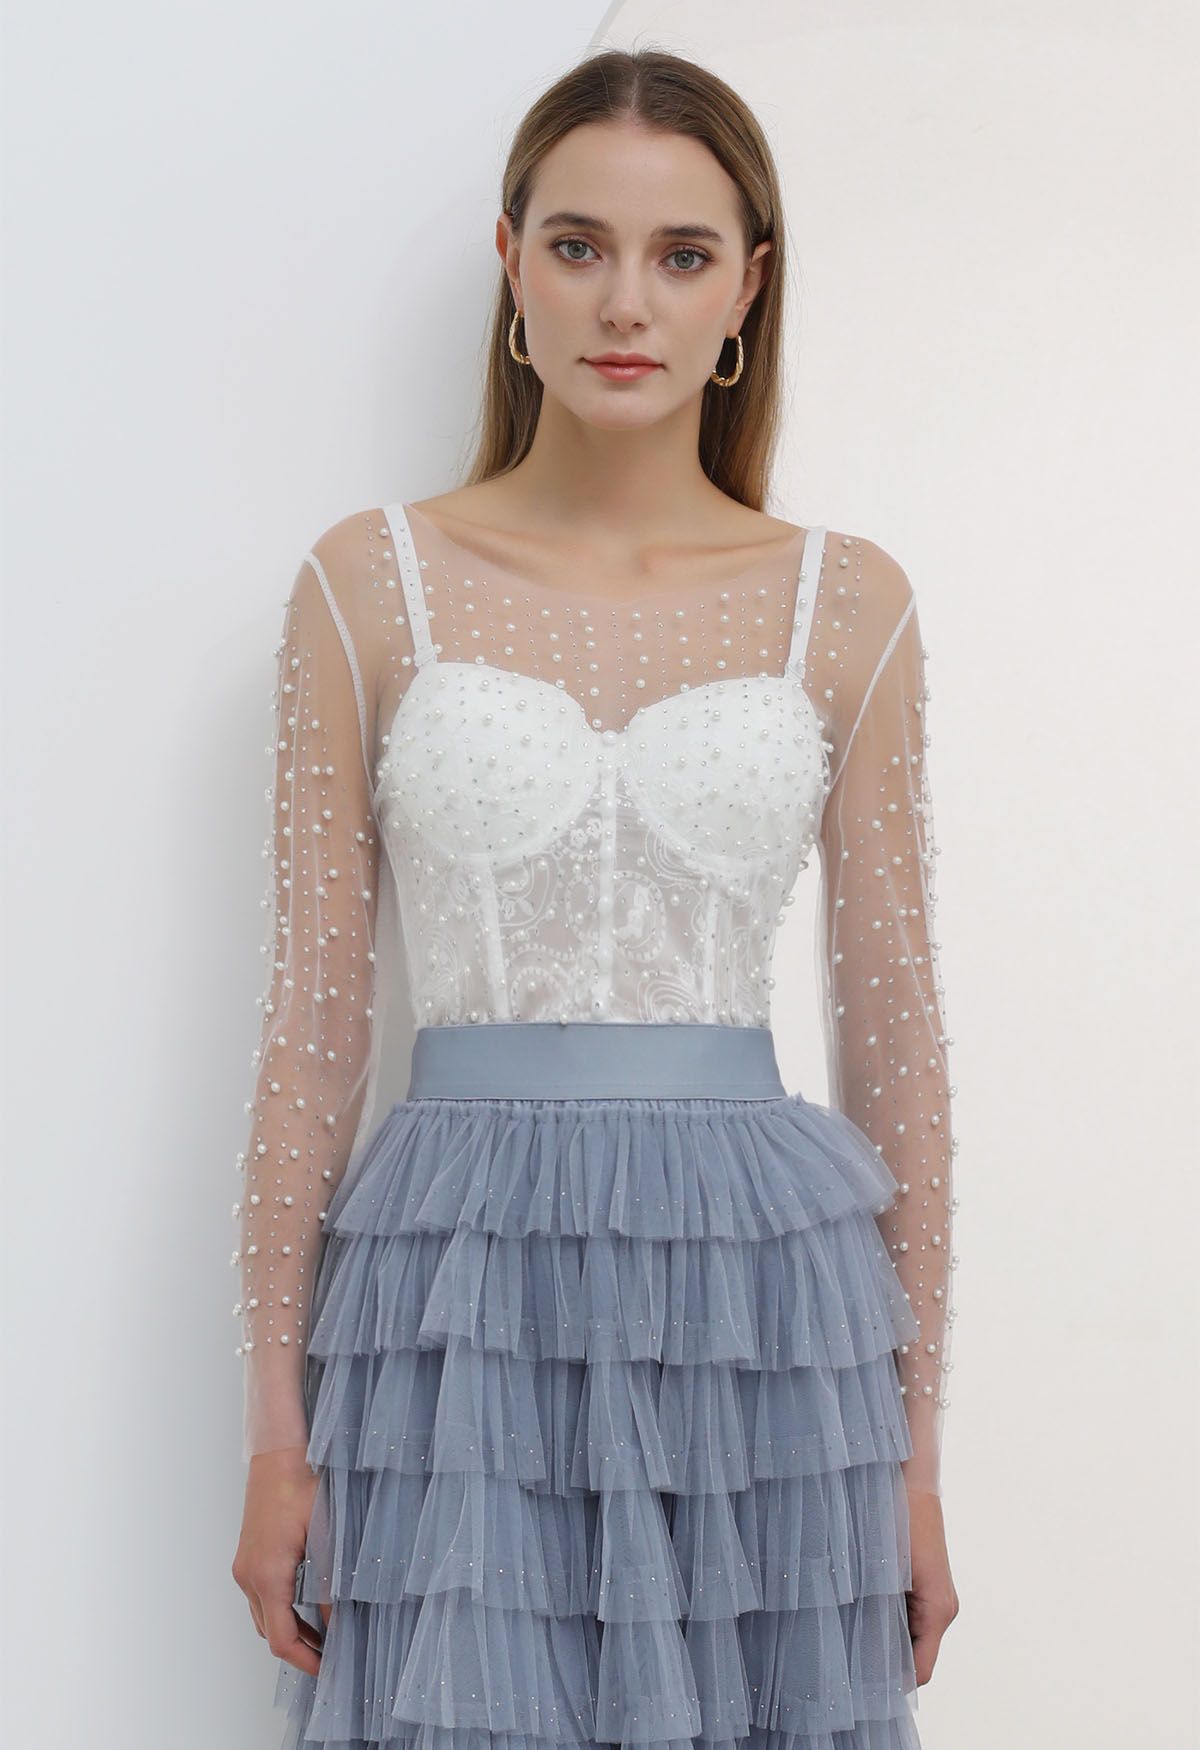 Full Pearl Embellished Sheer Mesh Top in White - Retro, Indie and